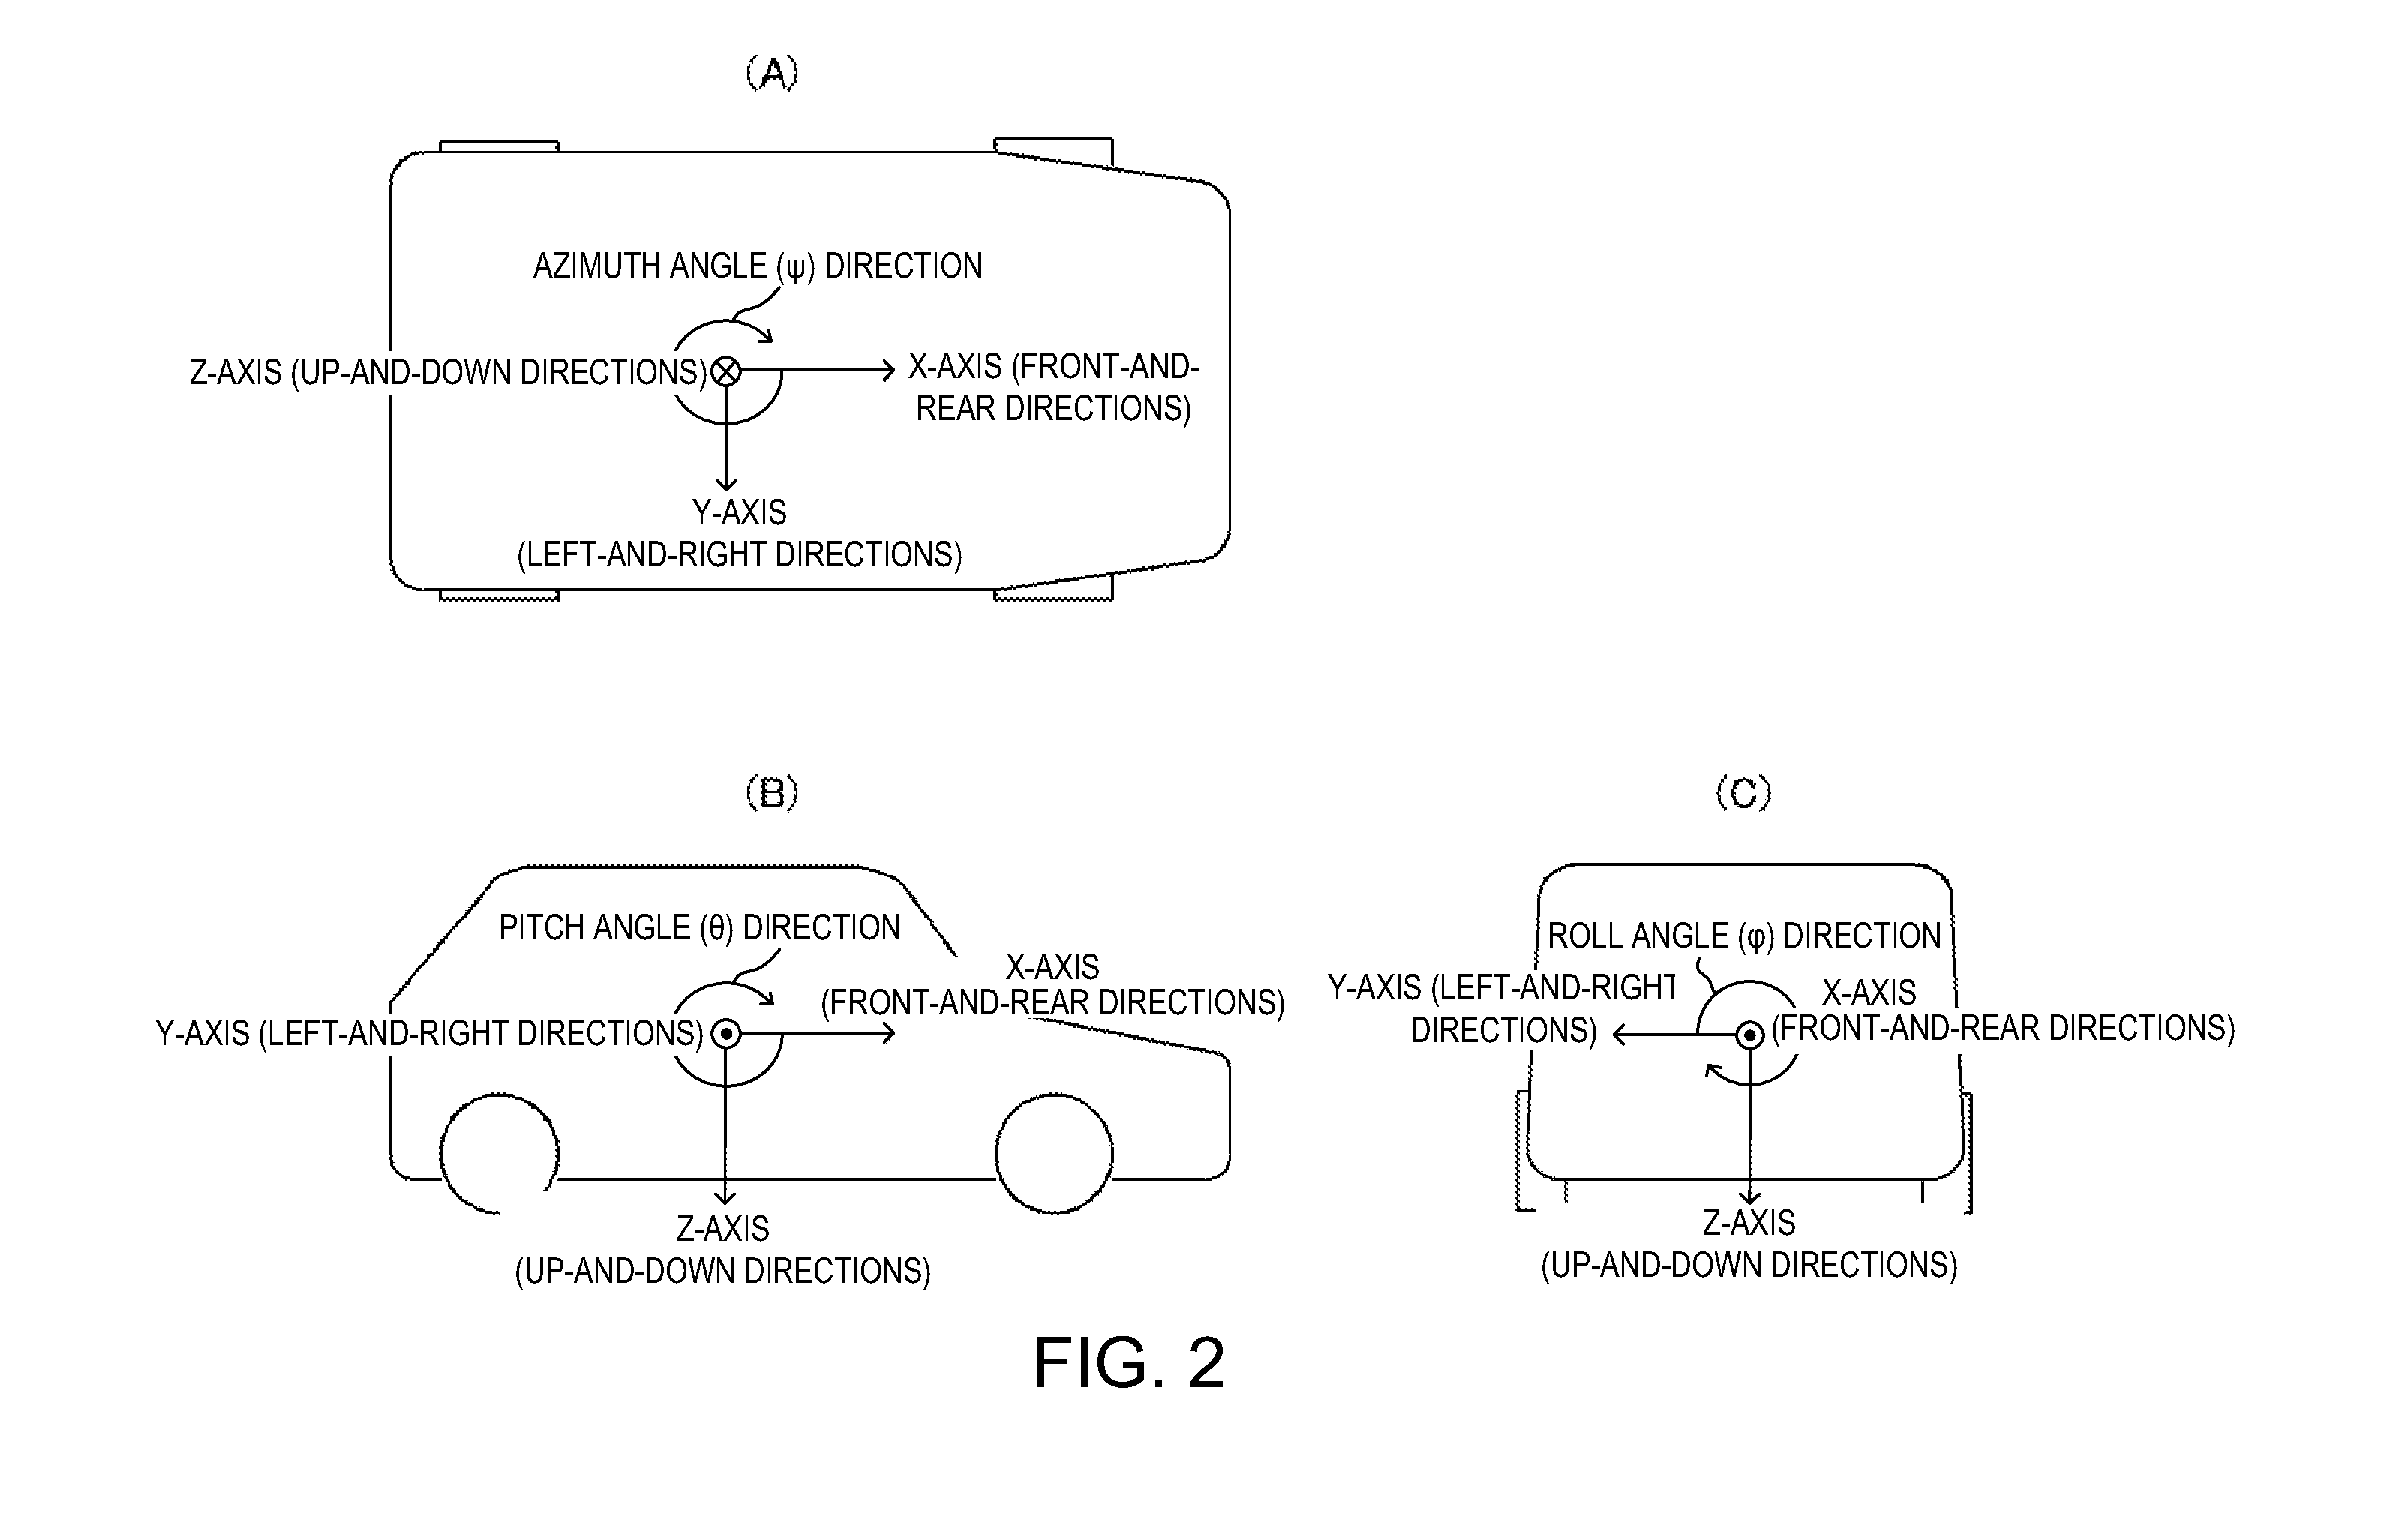 Moving state detecting device